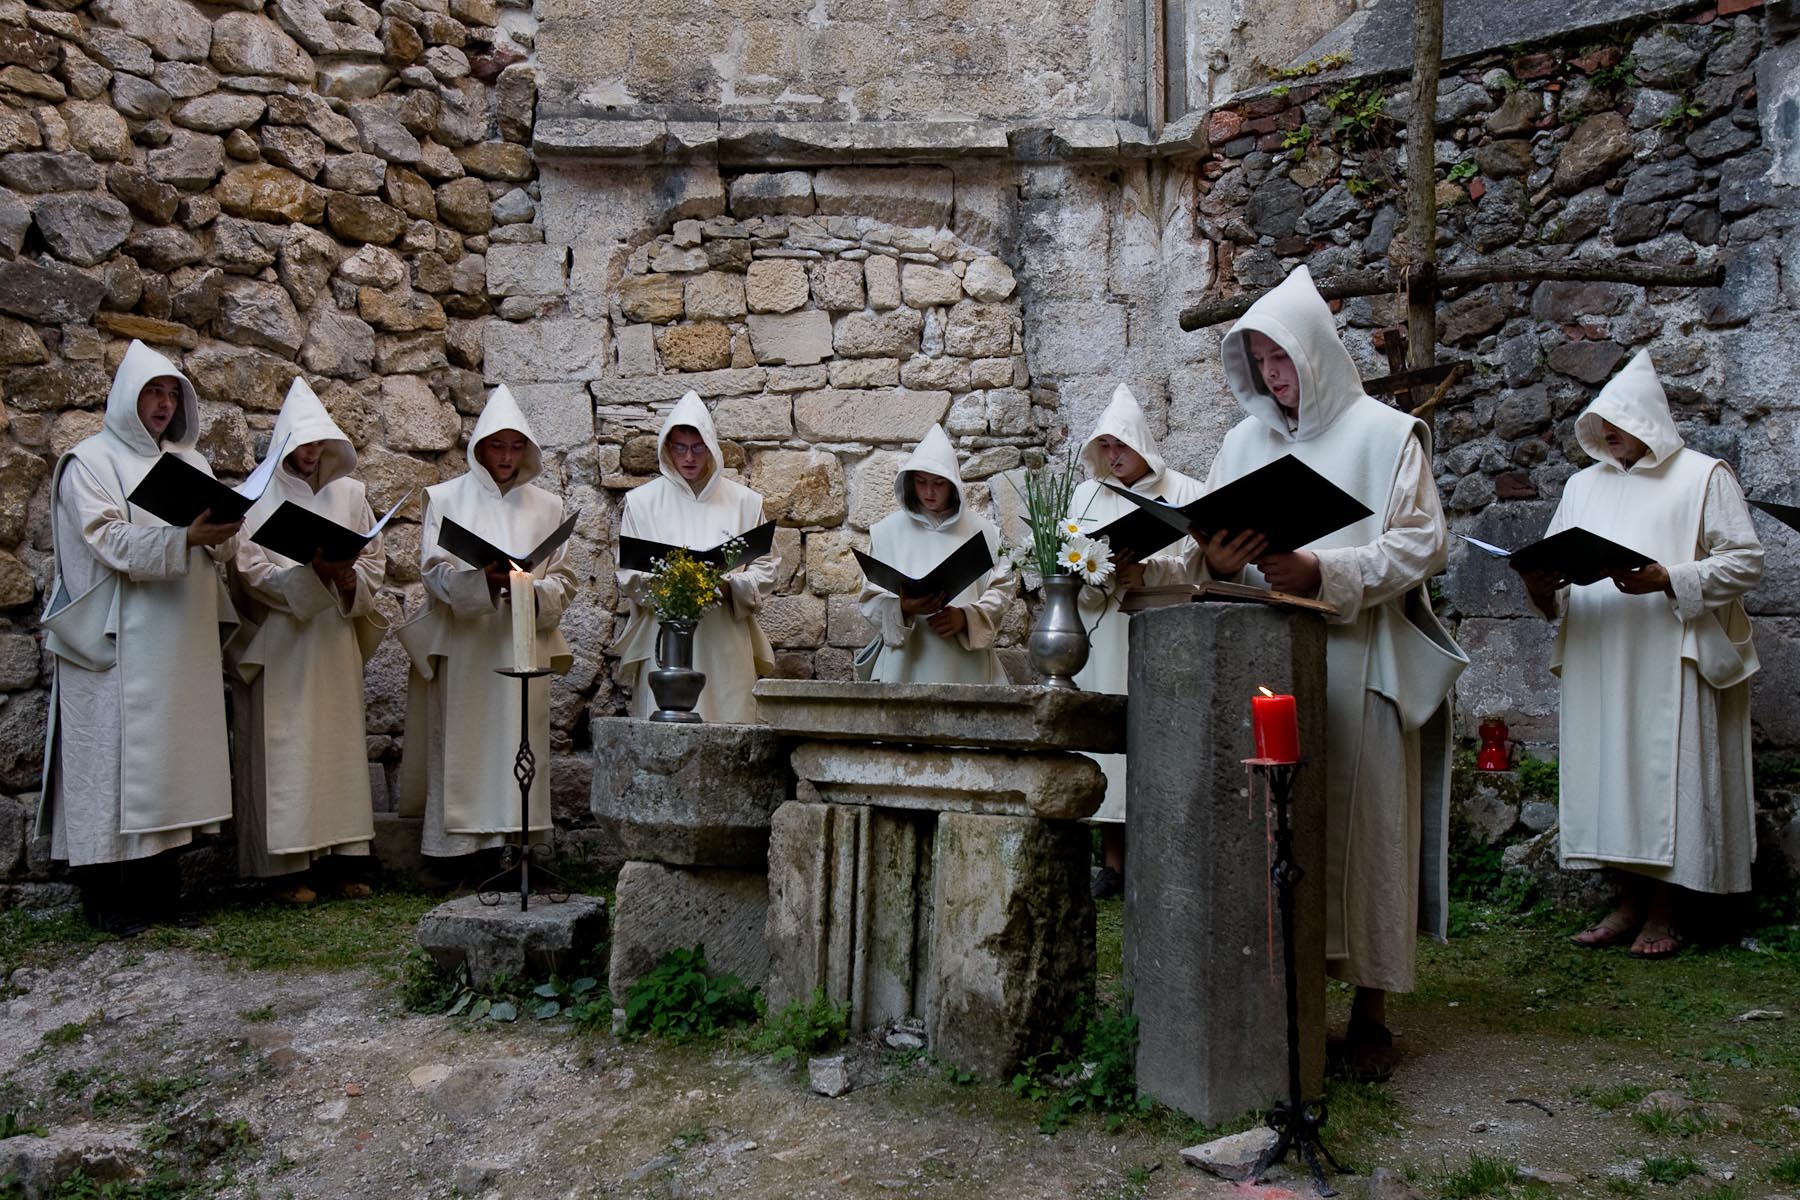 Performers dressed as monks sing chorales written in the Žiče Carthusian Monastery for the first time since they were written in 1280. The high profile cultural performance was a part of a two-day Fiery Carthusia Medieval event in 2007.